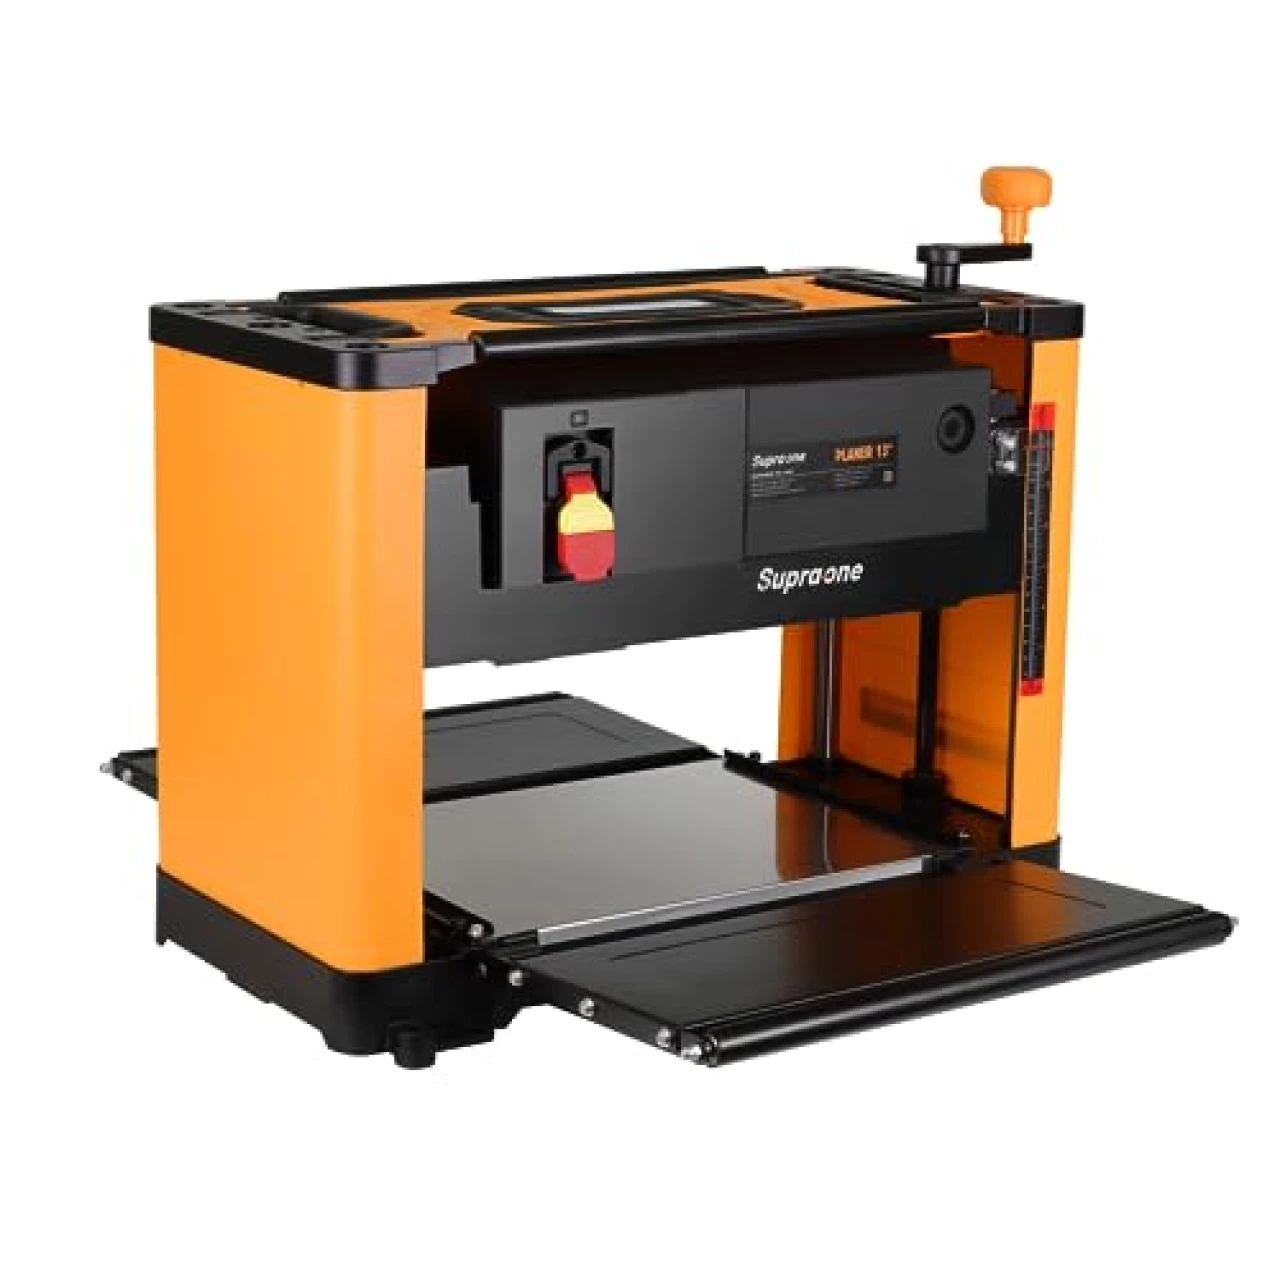 SUPRAONE Power Benchtop Planers 13inch with HSS Double-sided Use Blades Two Speed Thickness Planer 15-Amp 2000W Powerful Motor Planner for Both Hard &amp; Soft Wood Removal